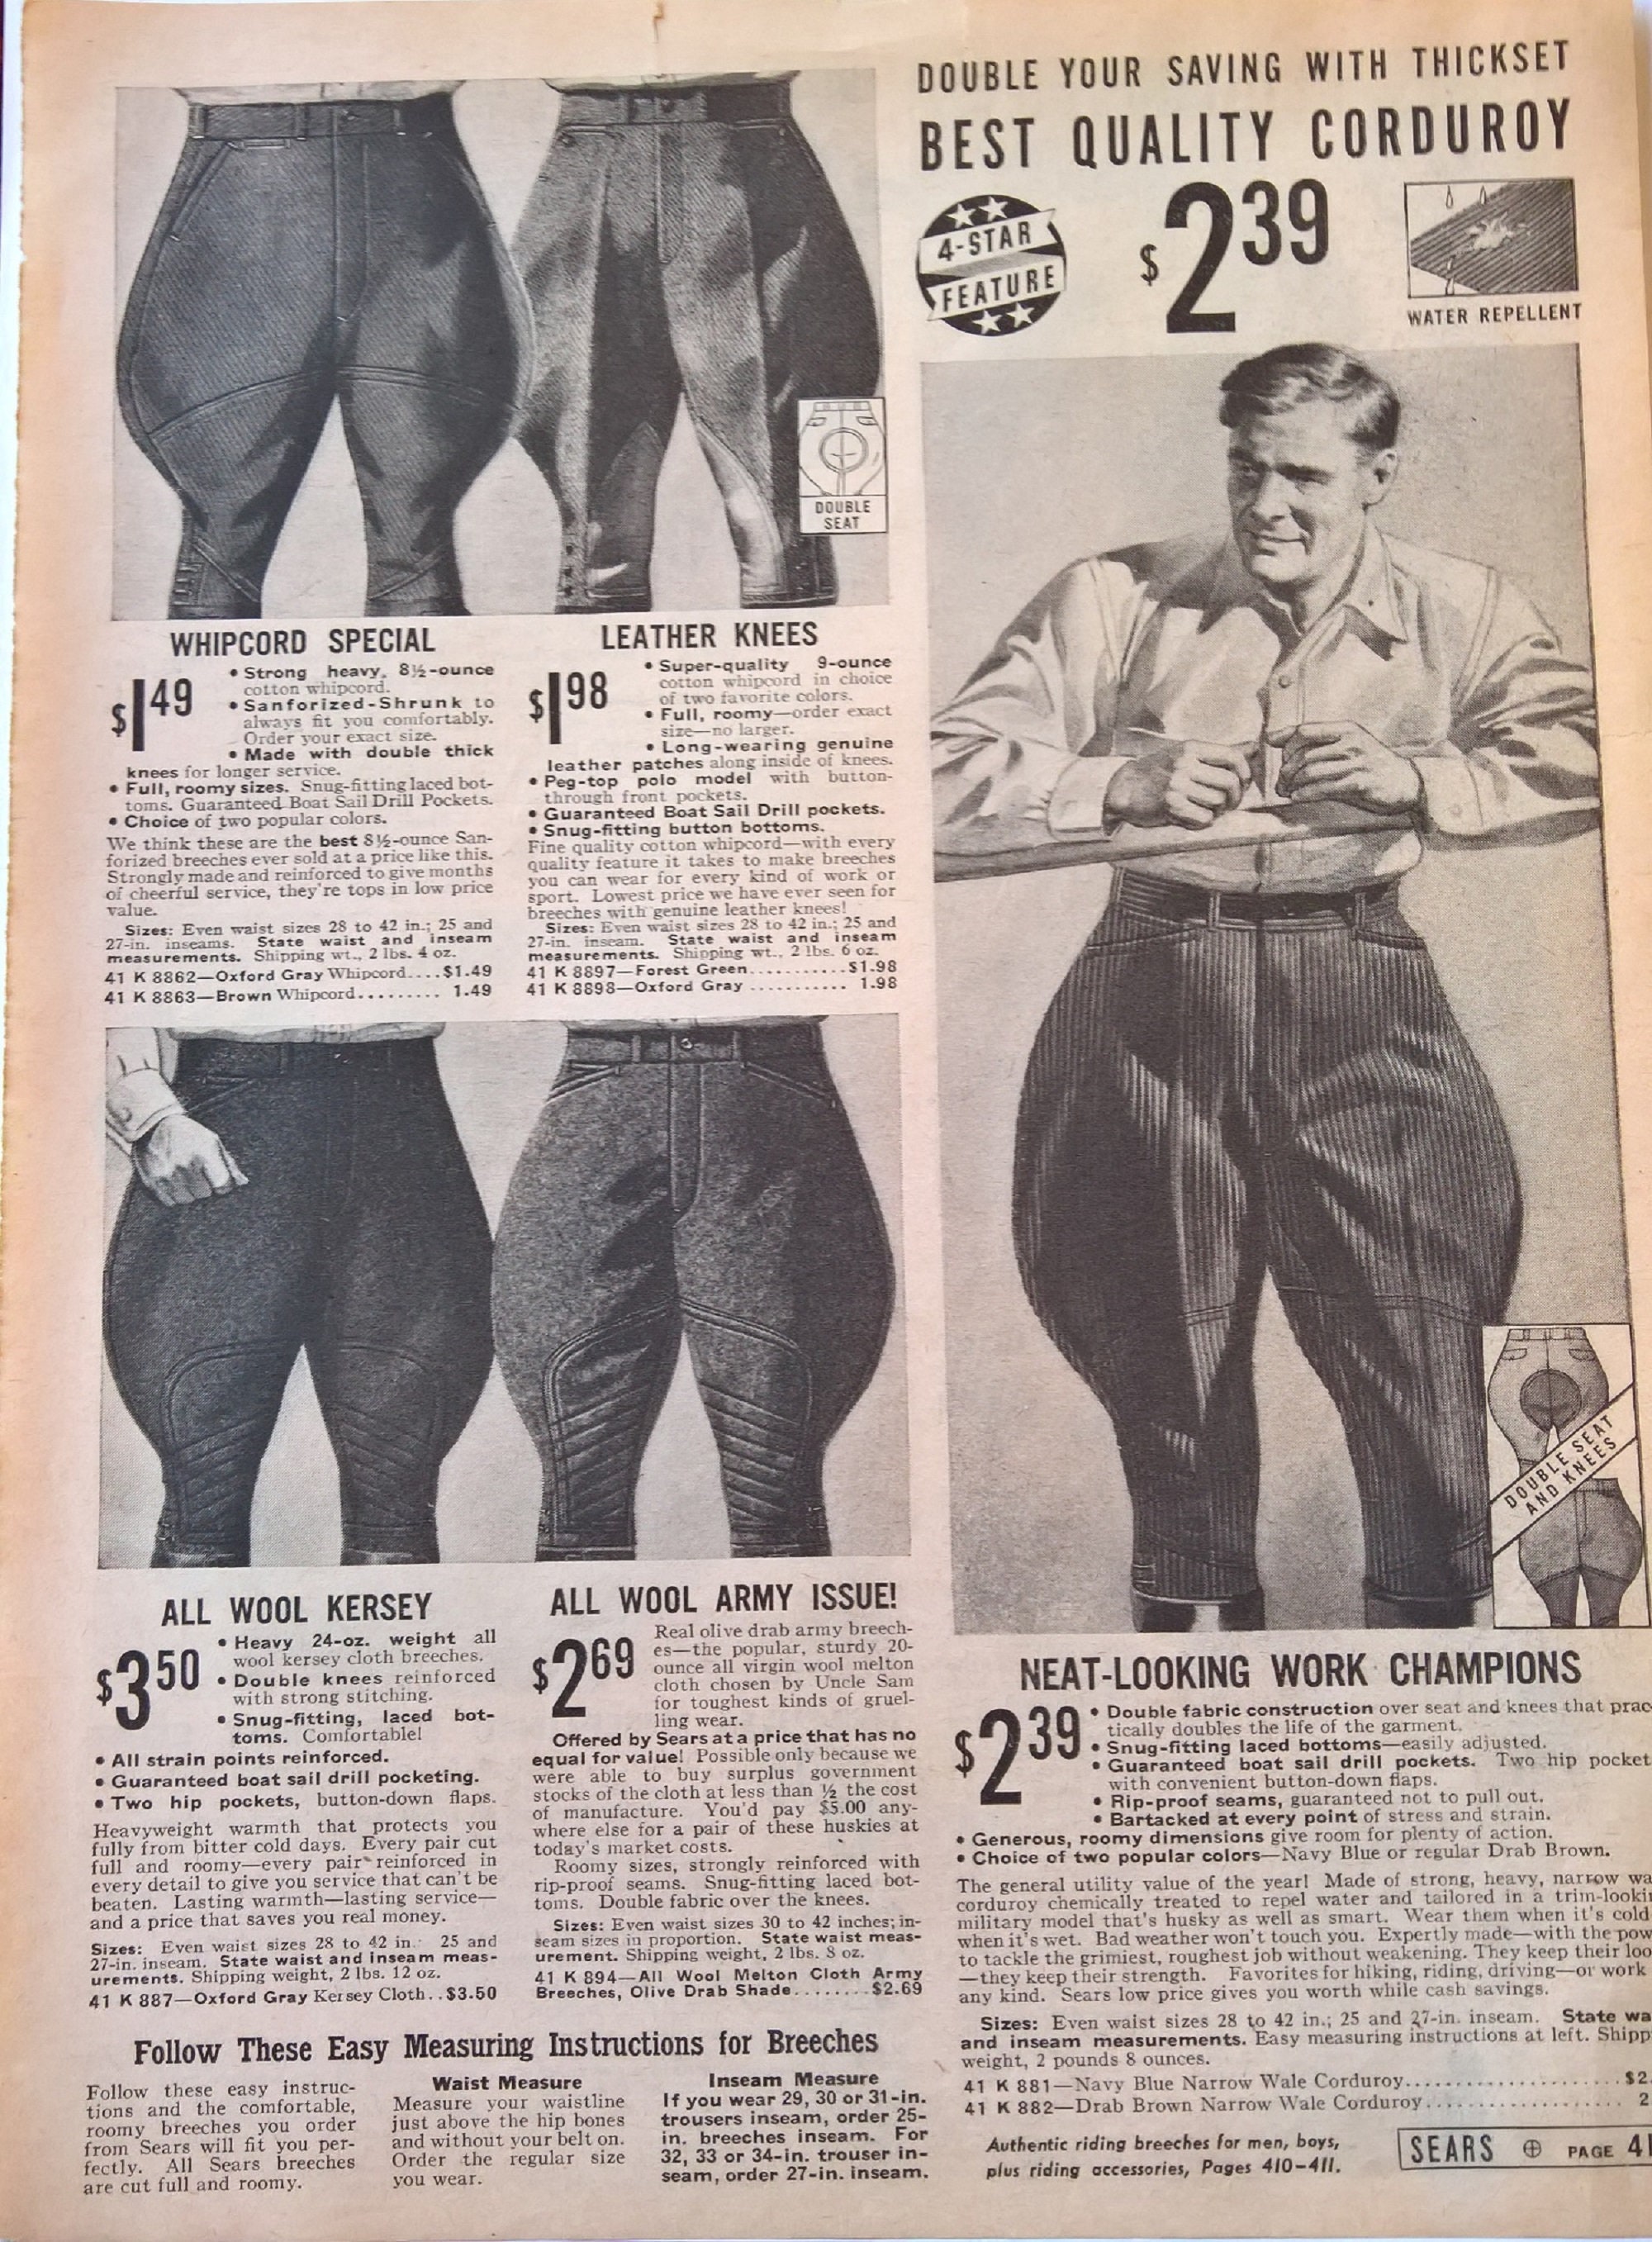 Sears Trapping Supplies 1938 Ad